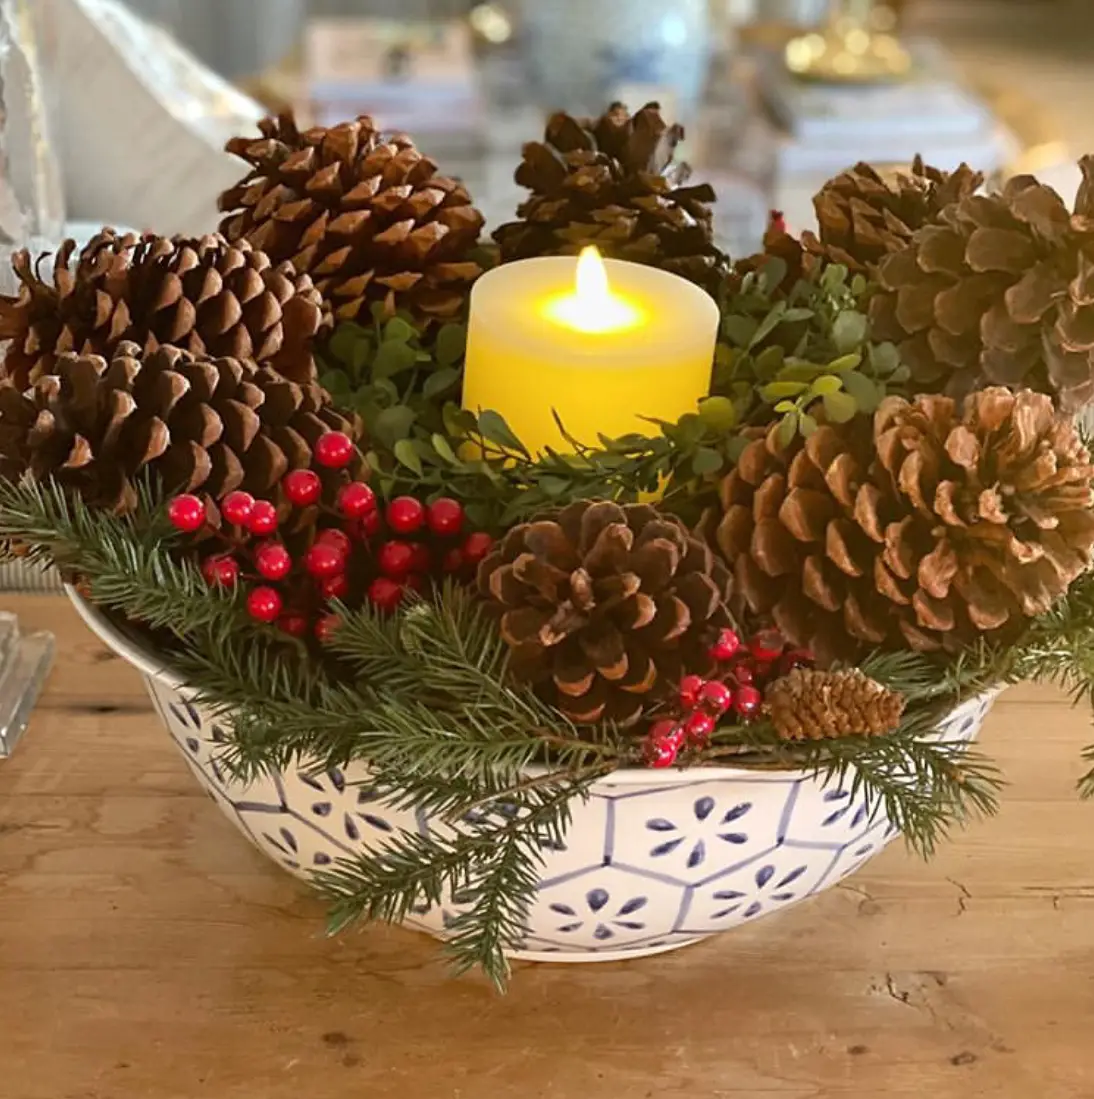 13 Beautiful Christmas Centerpieces For Your Table  The Wonder Cottage